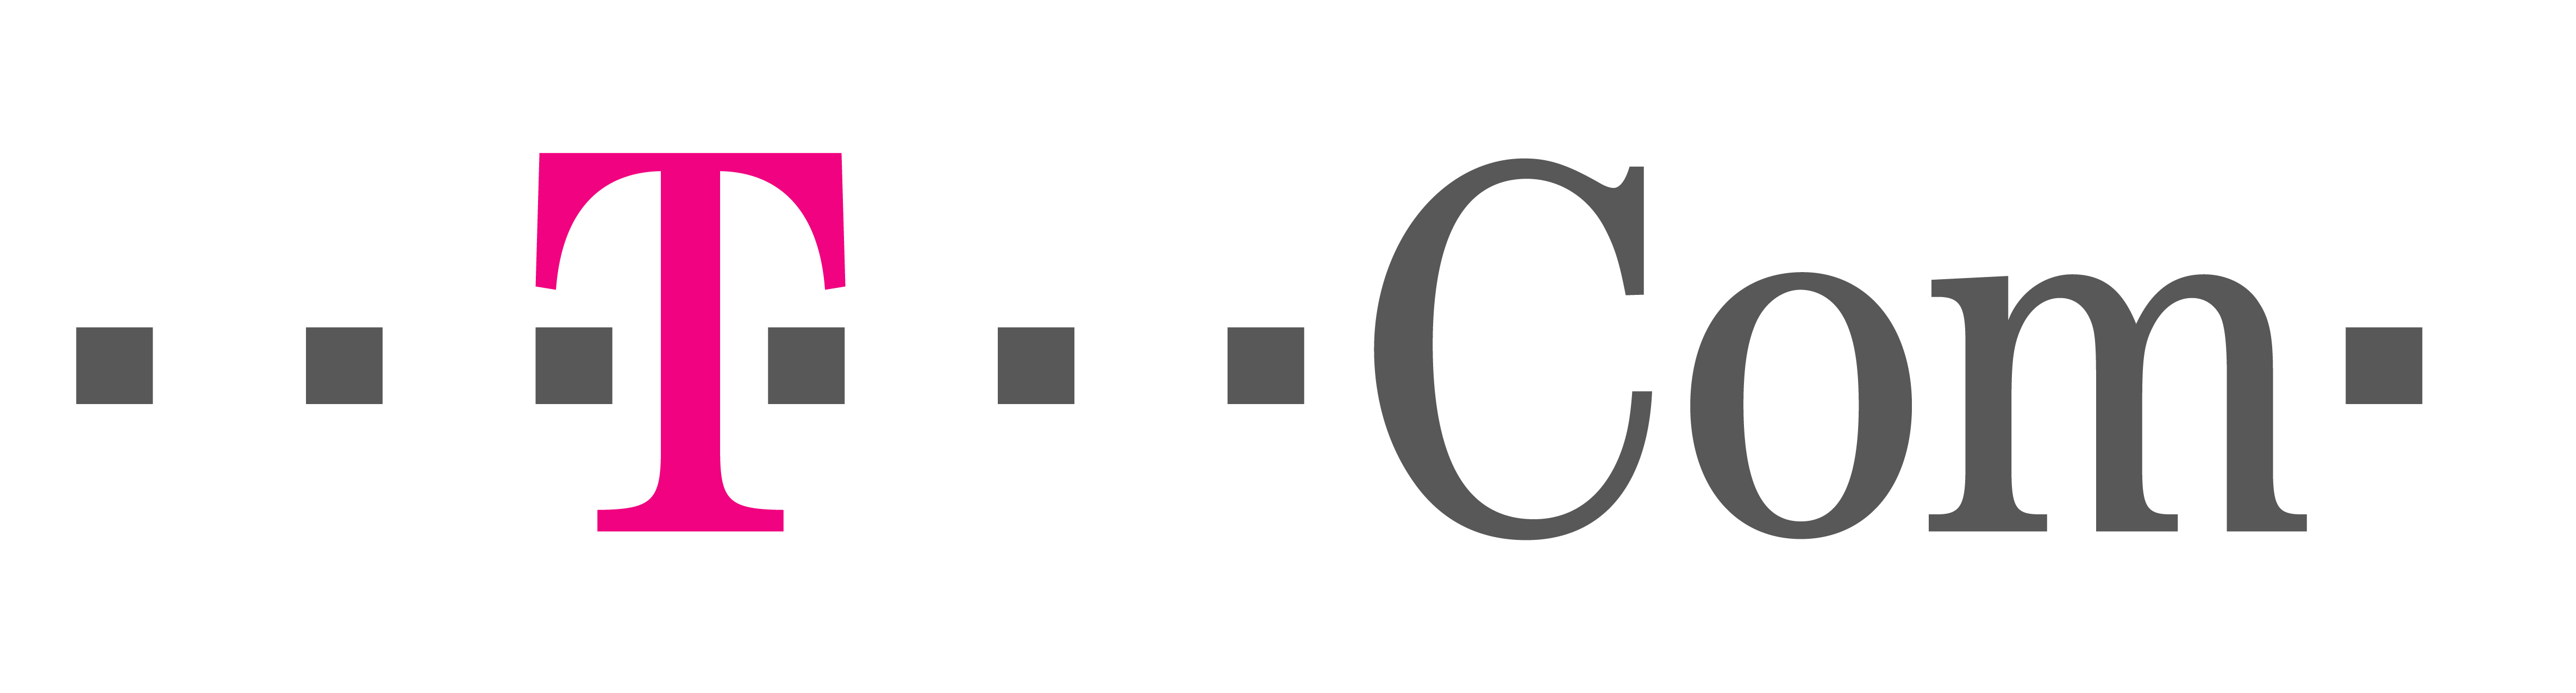 T-com logo: T is pink with three square dots on each side and is followed by a gray text 'Com' which is follwed by a gray square dot.